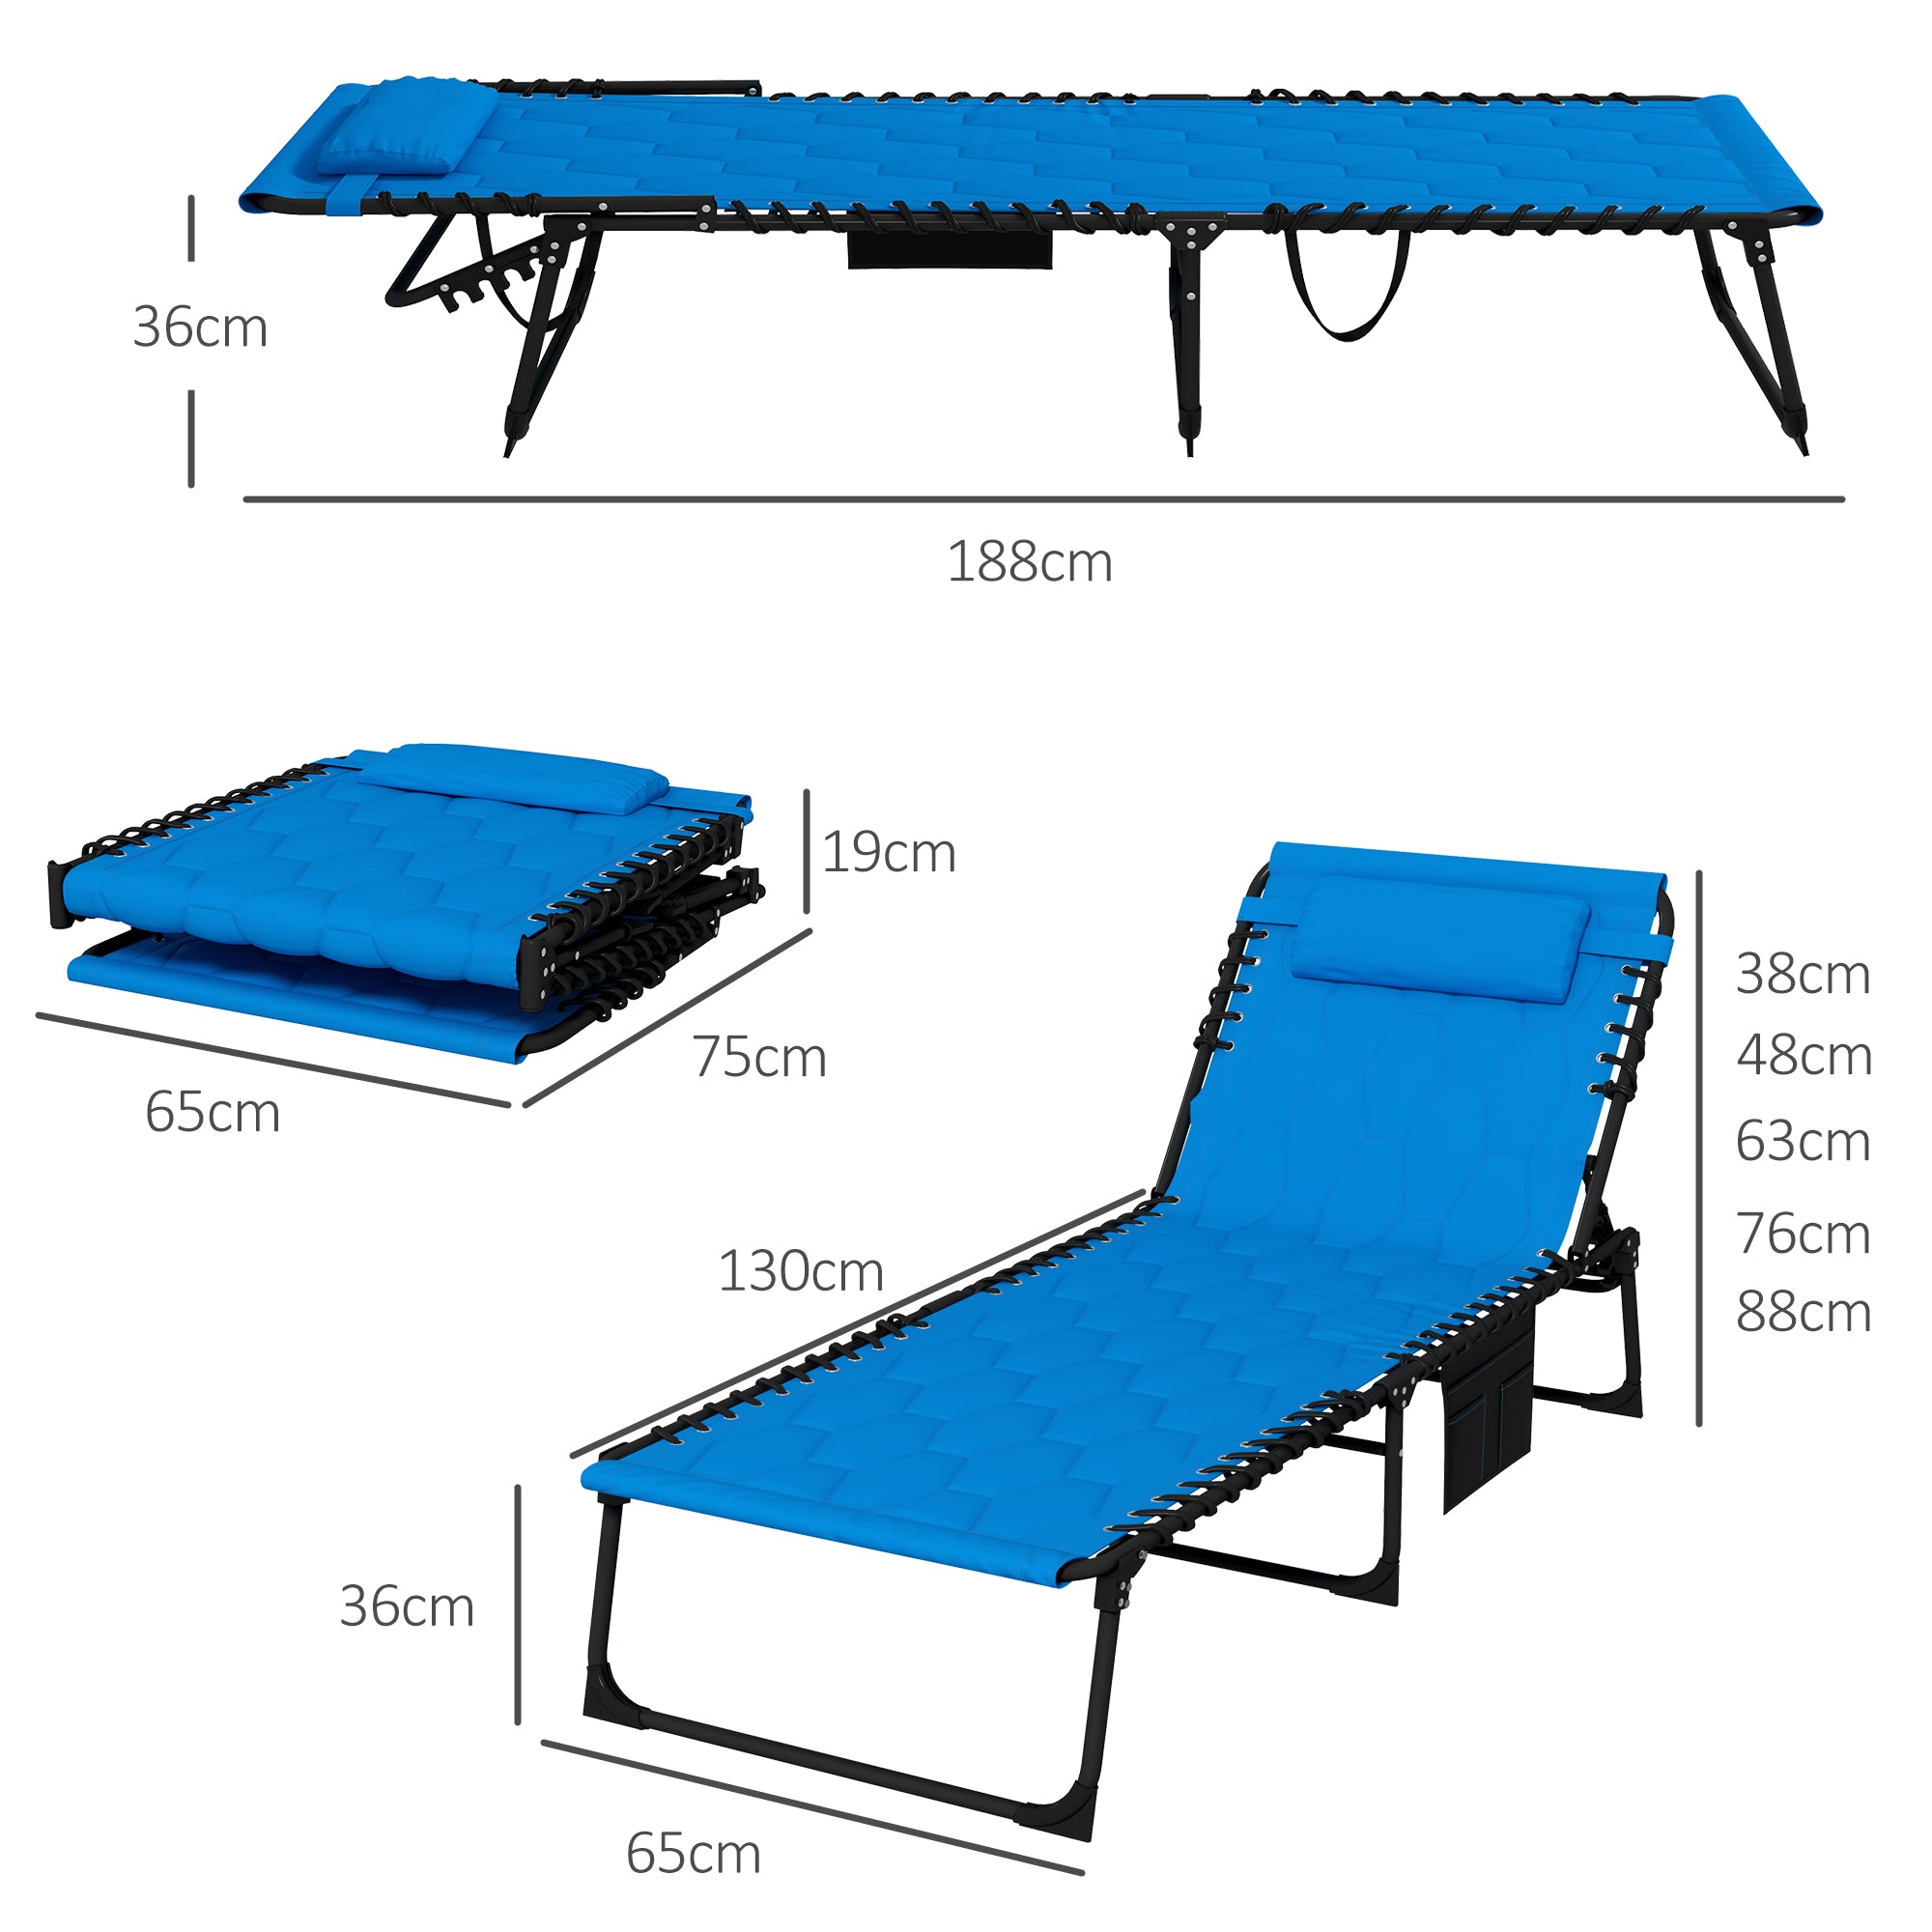 Outsunny Foldable Sun Lounger Set with 5-level Reclining Back, Outdoor Tanning Chairs w/ Padded Seat, Outdoor Sun Loungers w/ Side Pocket